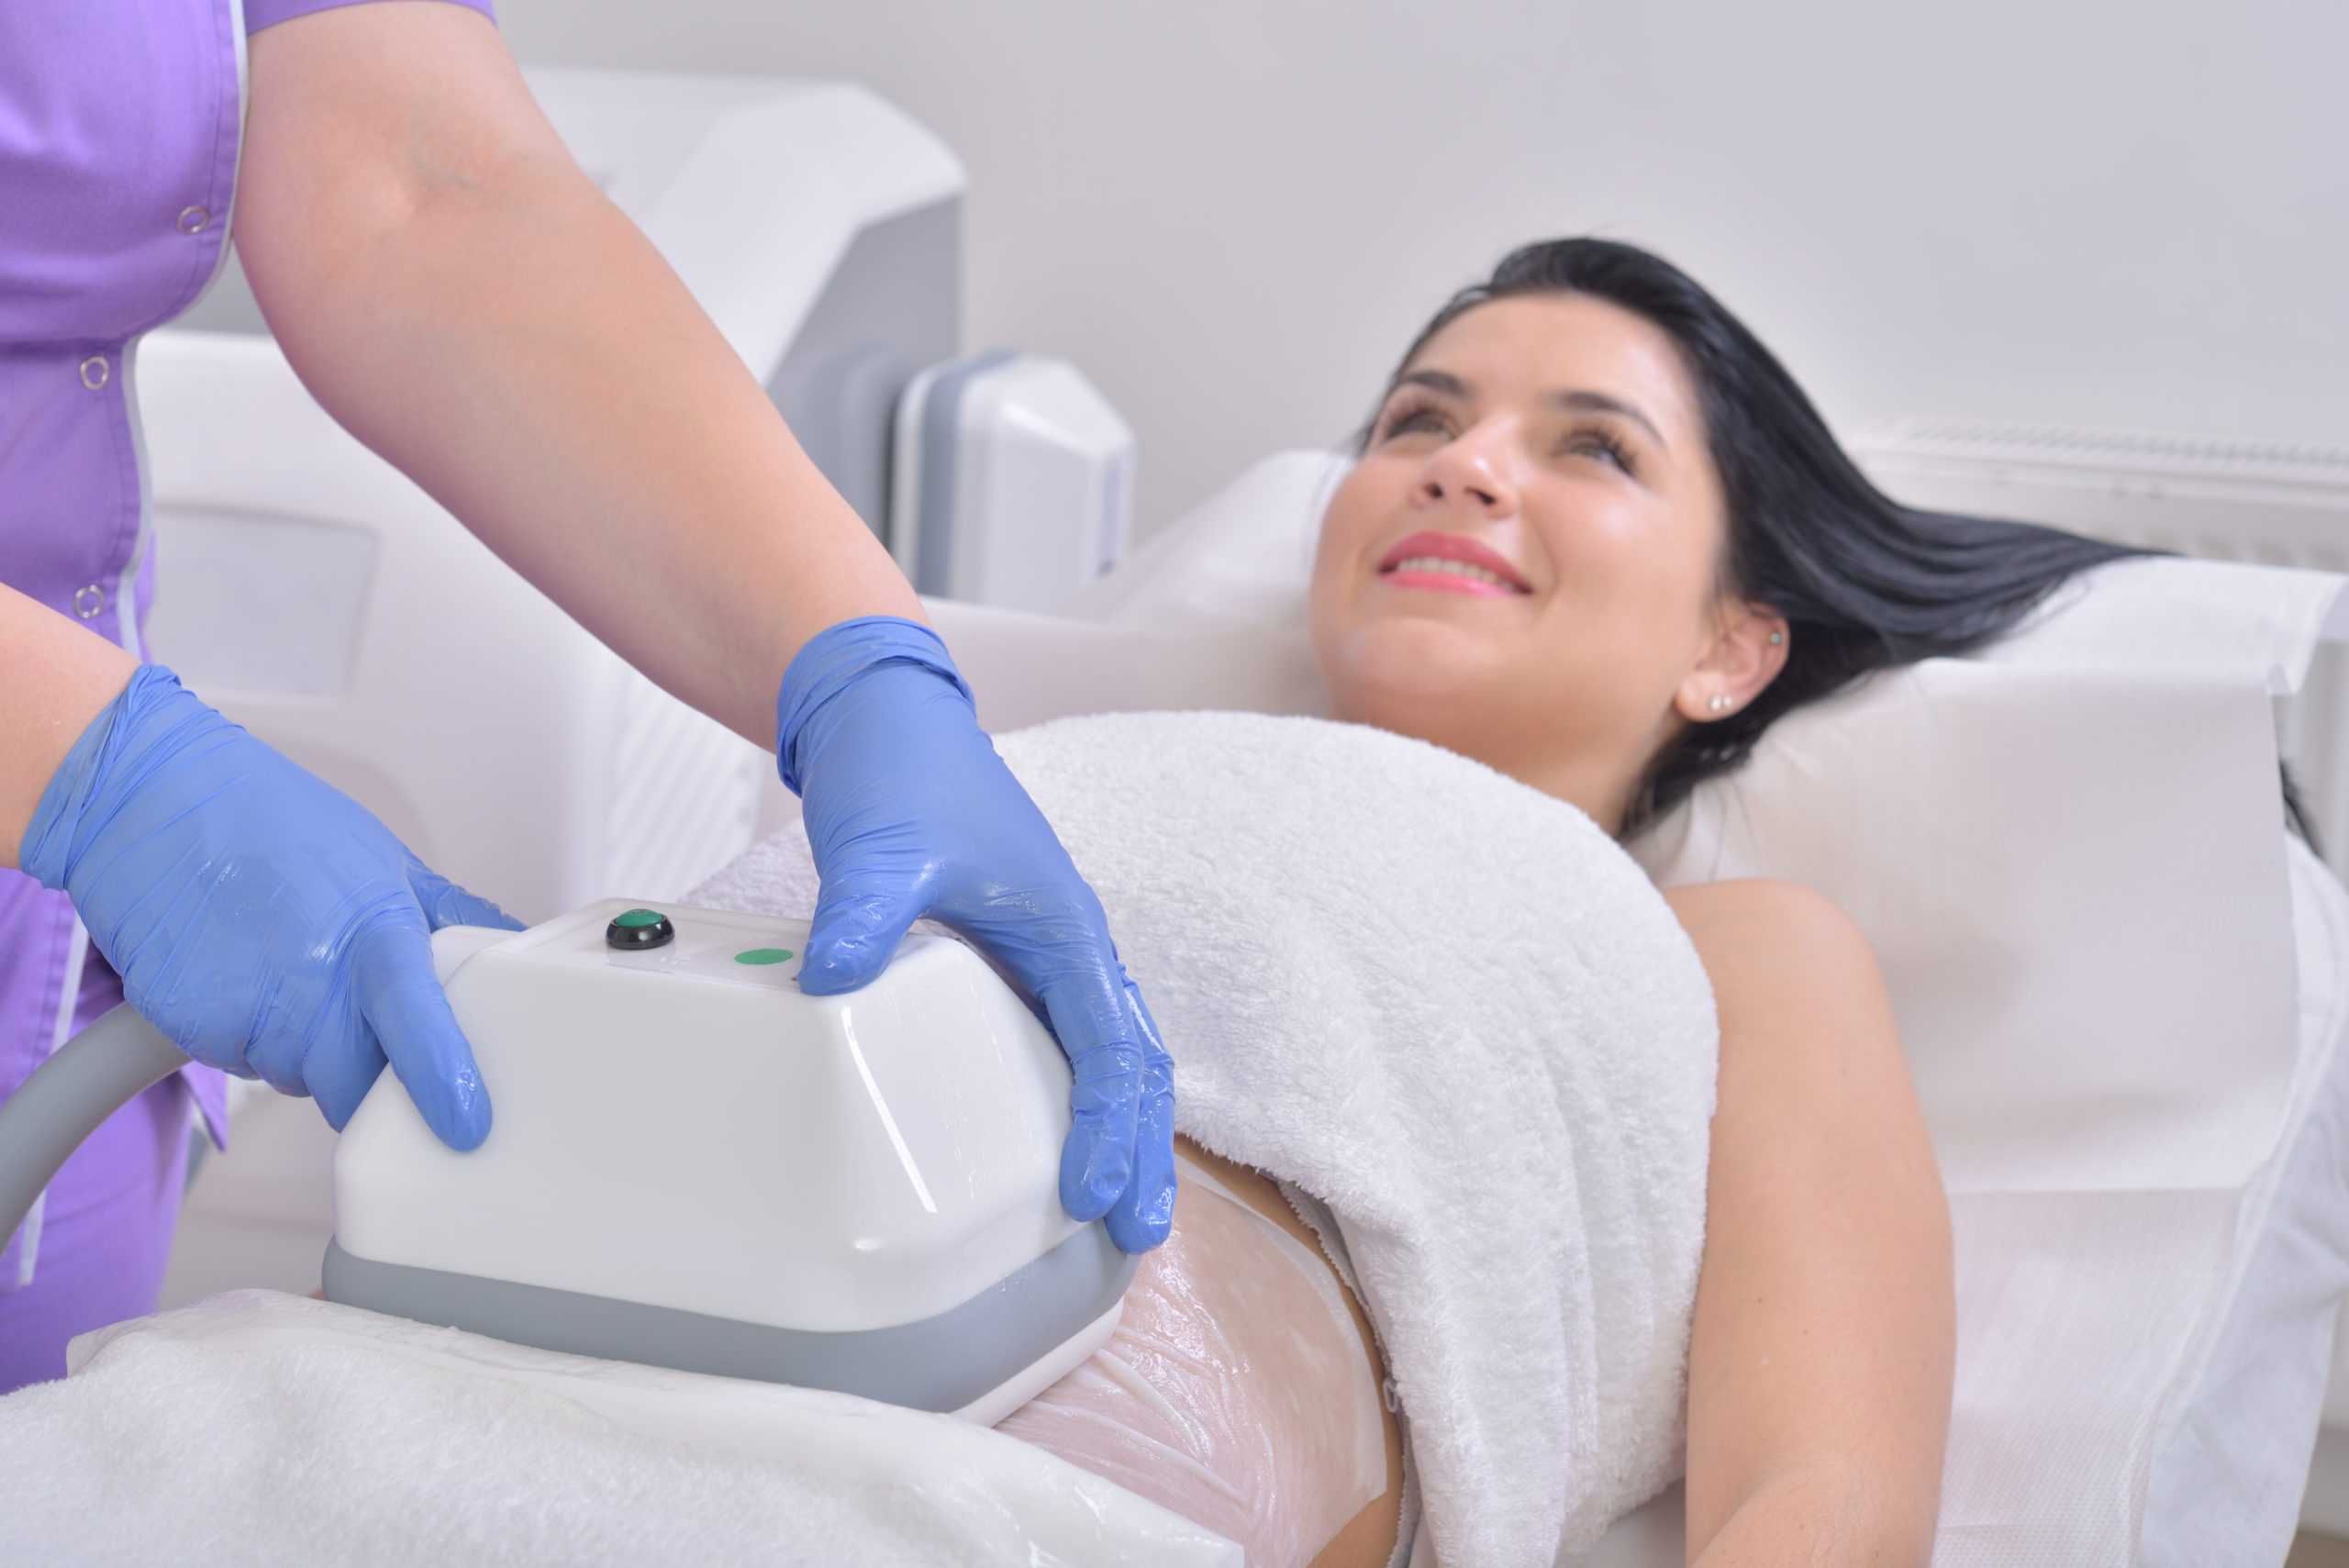 Pretty young woman getting cryolipolyse treatment - CoolSculpting